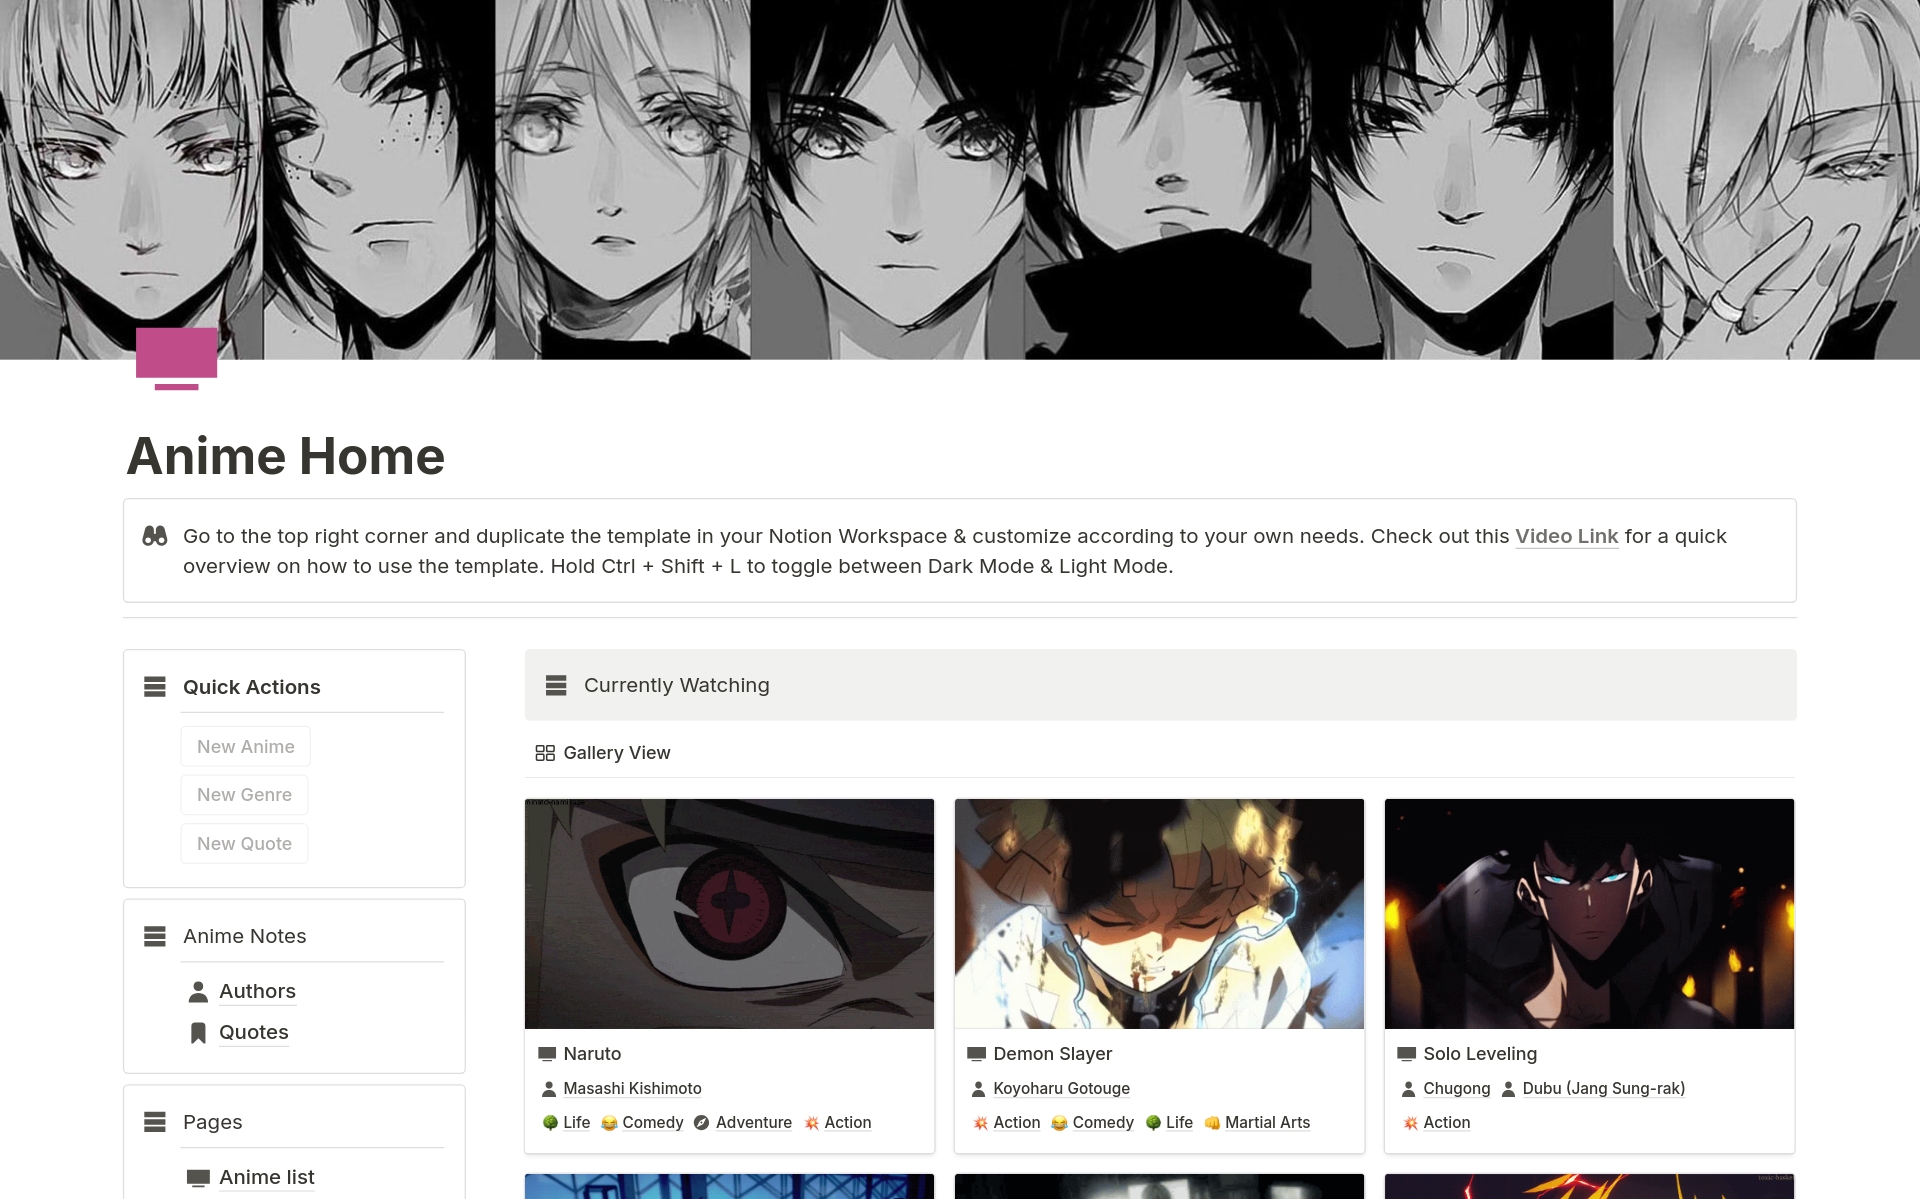 Welcome to your new Anime Home – the one-stop Notion template that turns your anime tracking into an art form! Whether you're a casual viewer or a die-hard otaku, this dashboard is designed to make managing your anime life both organized and fun.